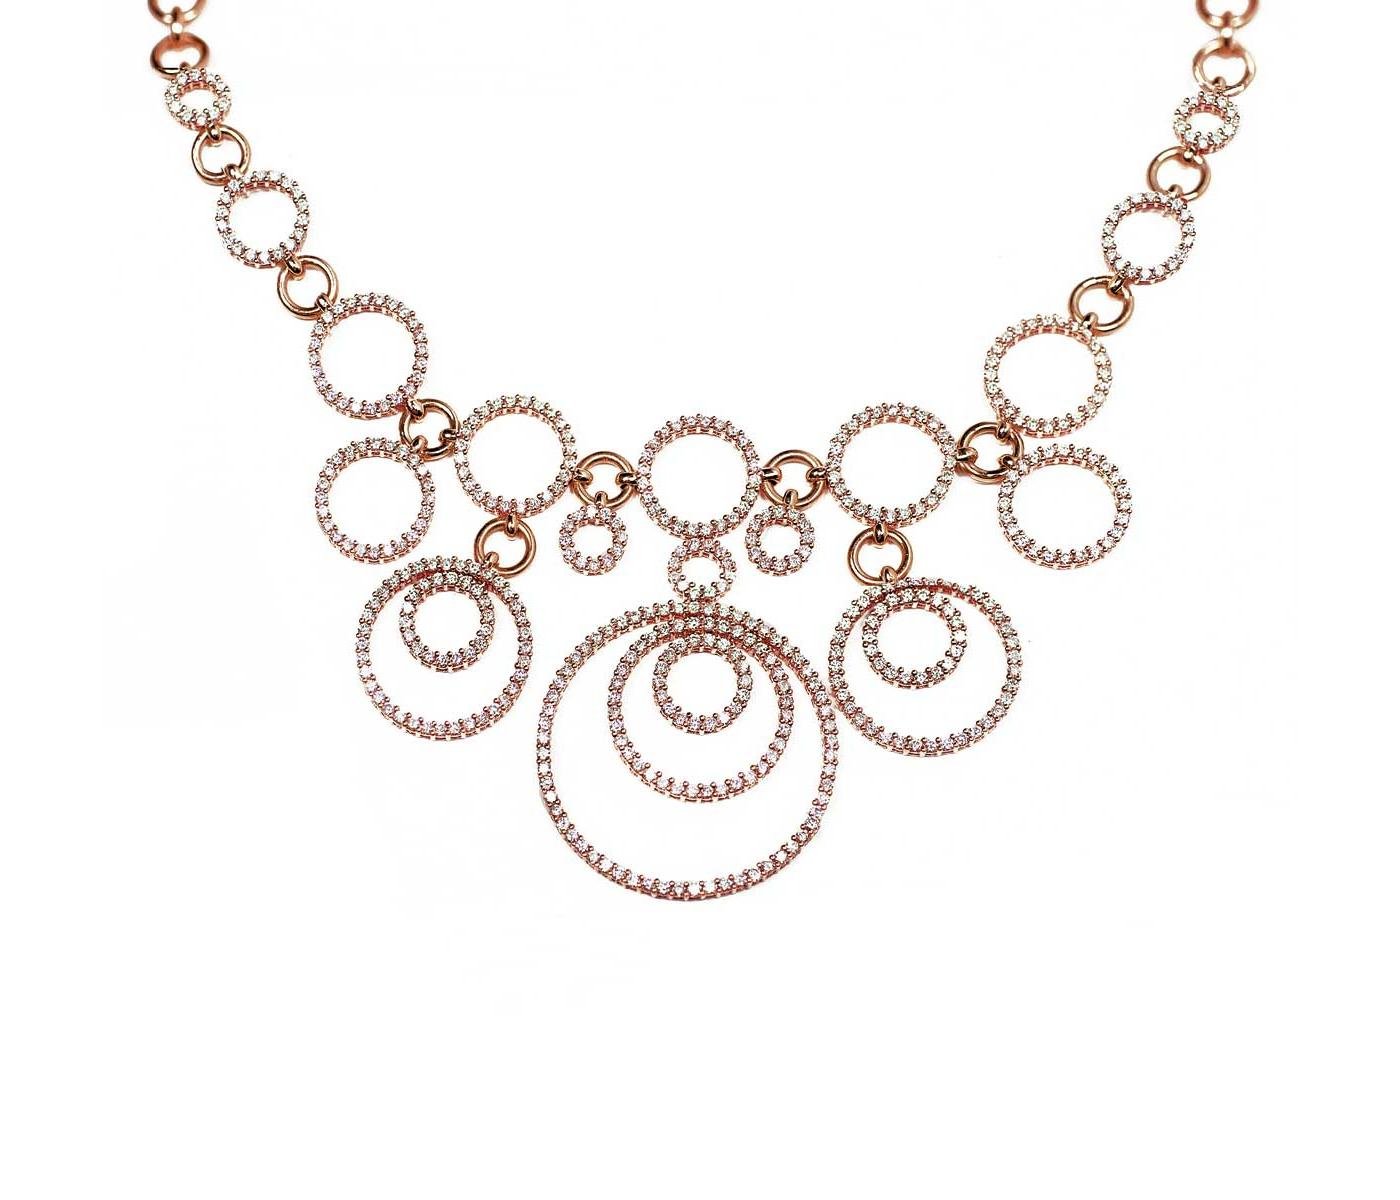 Necklace by Leo Pizzo